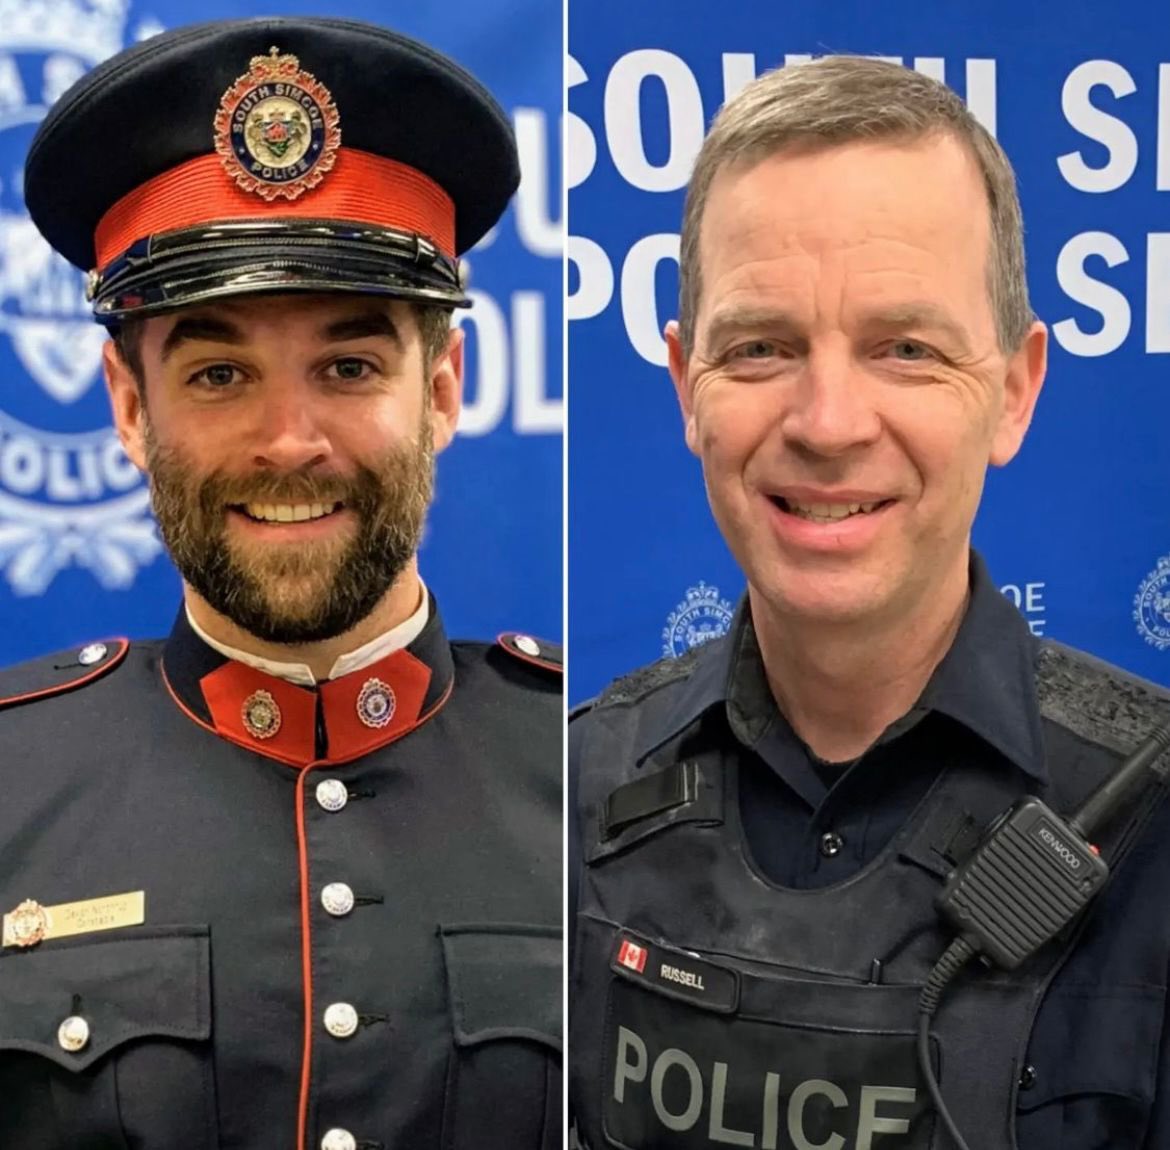 I am devastated to have learned about the news that came out this week regarding @SouthSimcoePS officers Constable. Devon Northrop and Constable. Morgan Russell who were killed in the line of duty. My thoughts and prays go out to their family, friends, and all police members.